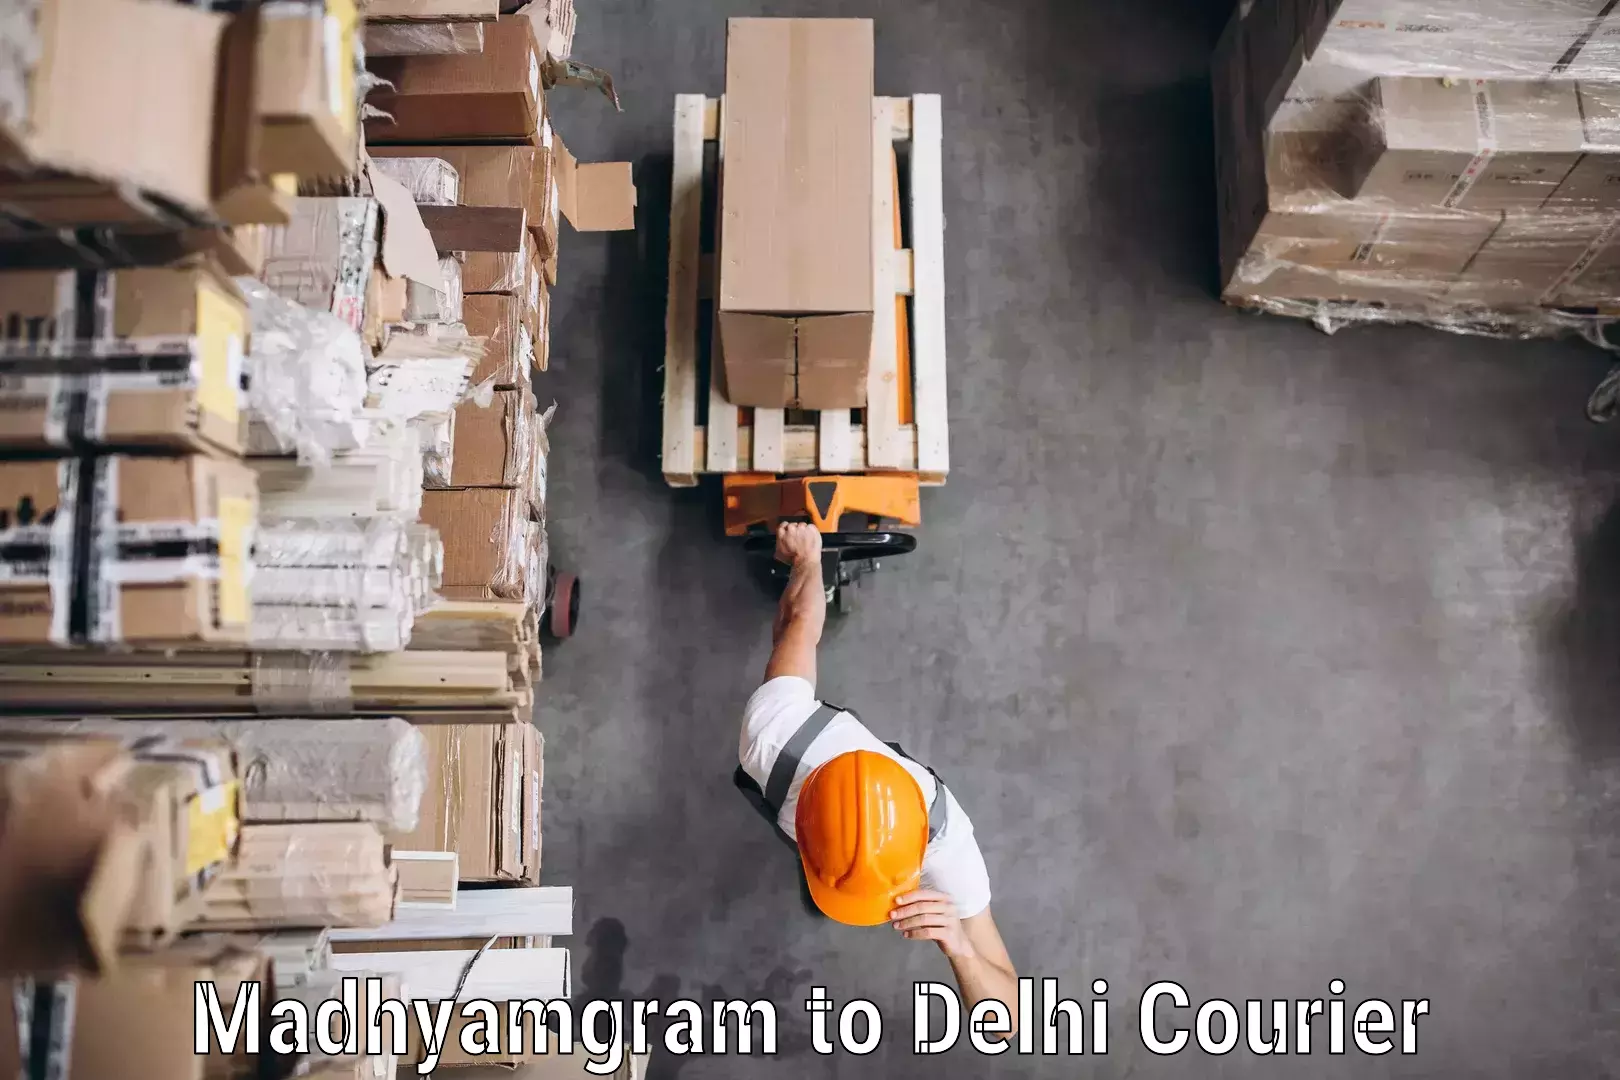 On-call courier service Madhyamgram to Krishna Nagar